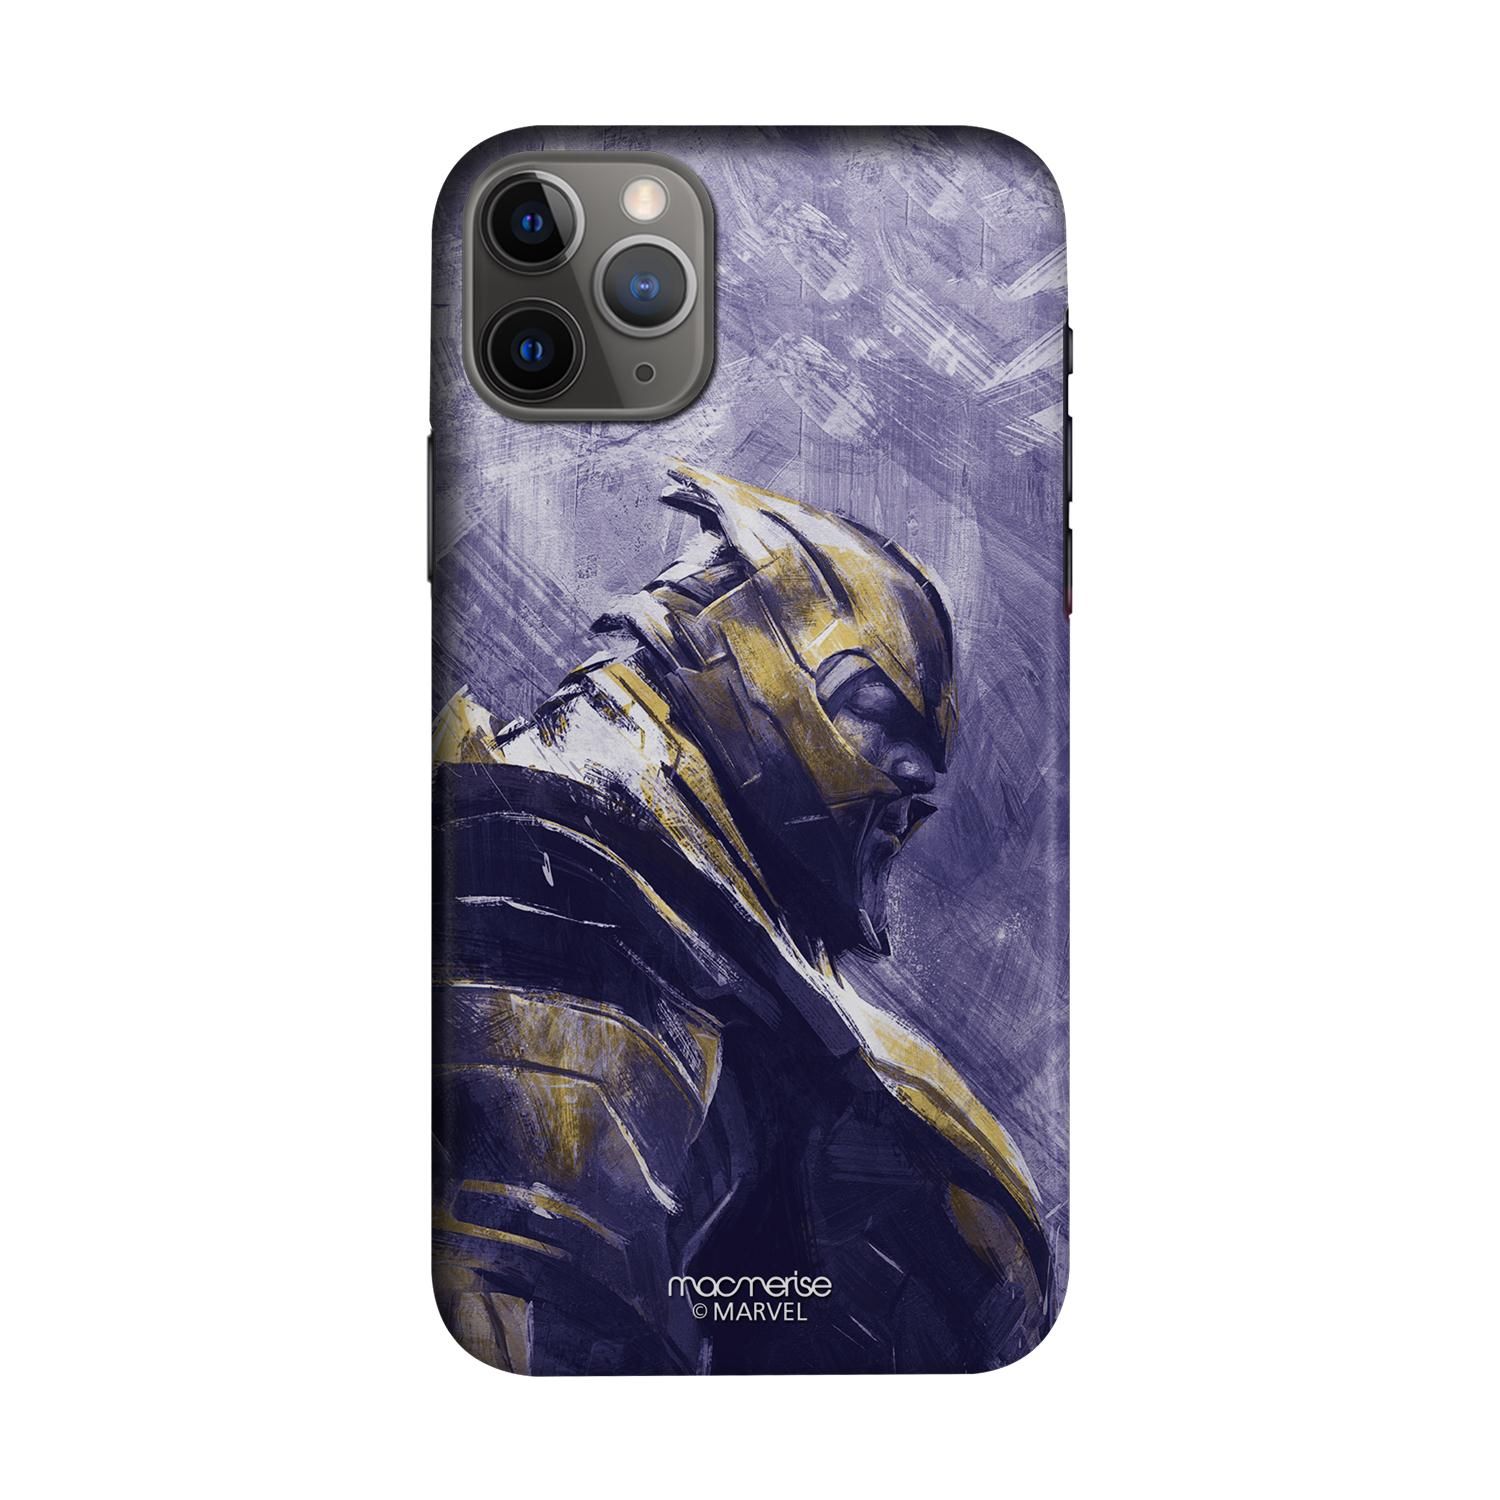 Buy Thanos suited up - Sleek Phone Case for iPhone 11 Pro Max Online